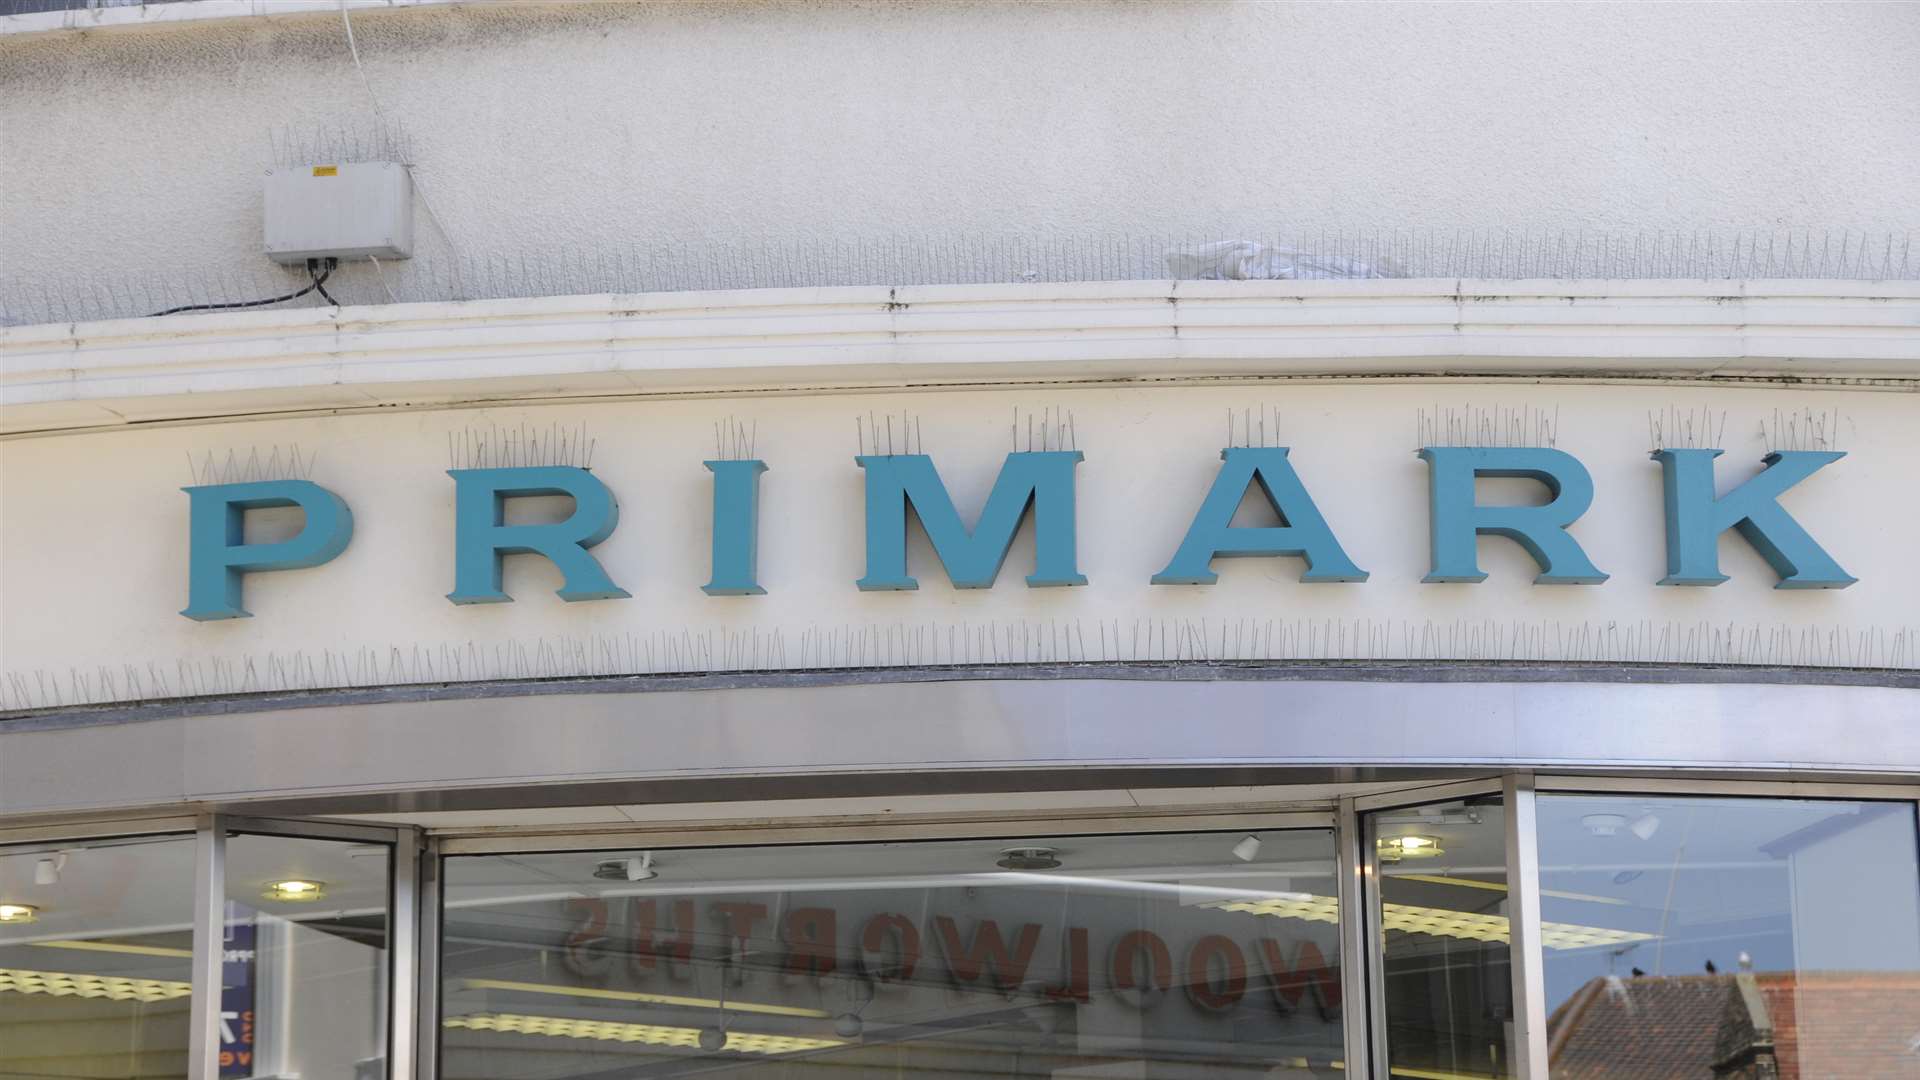 Former Margate high street Primark will be turned into flats and more